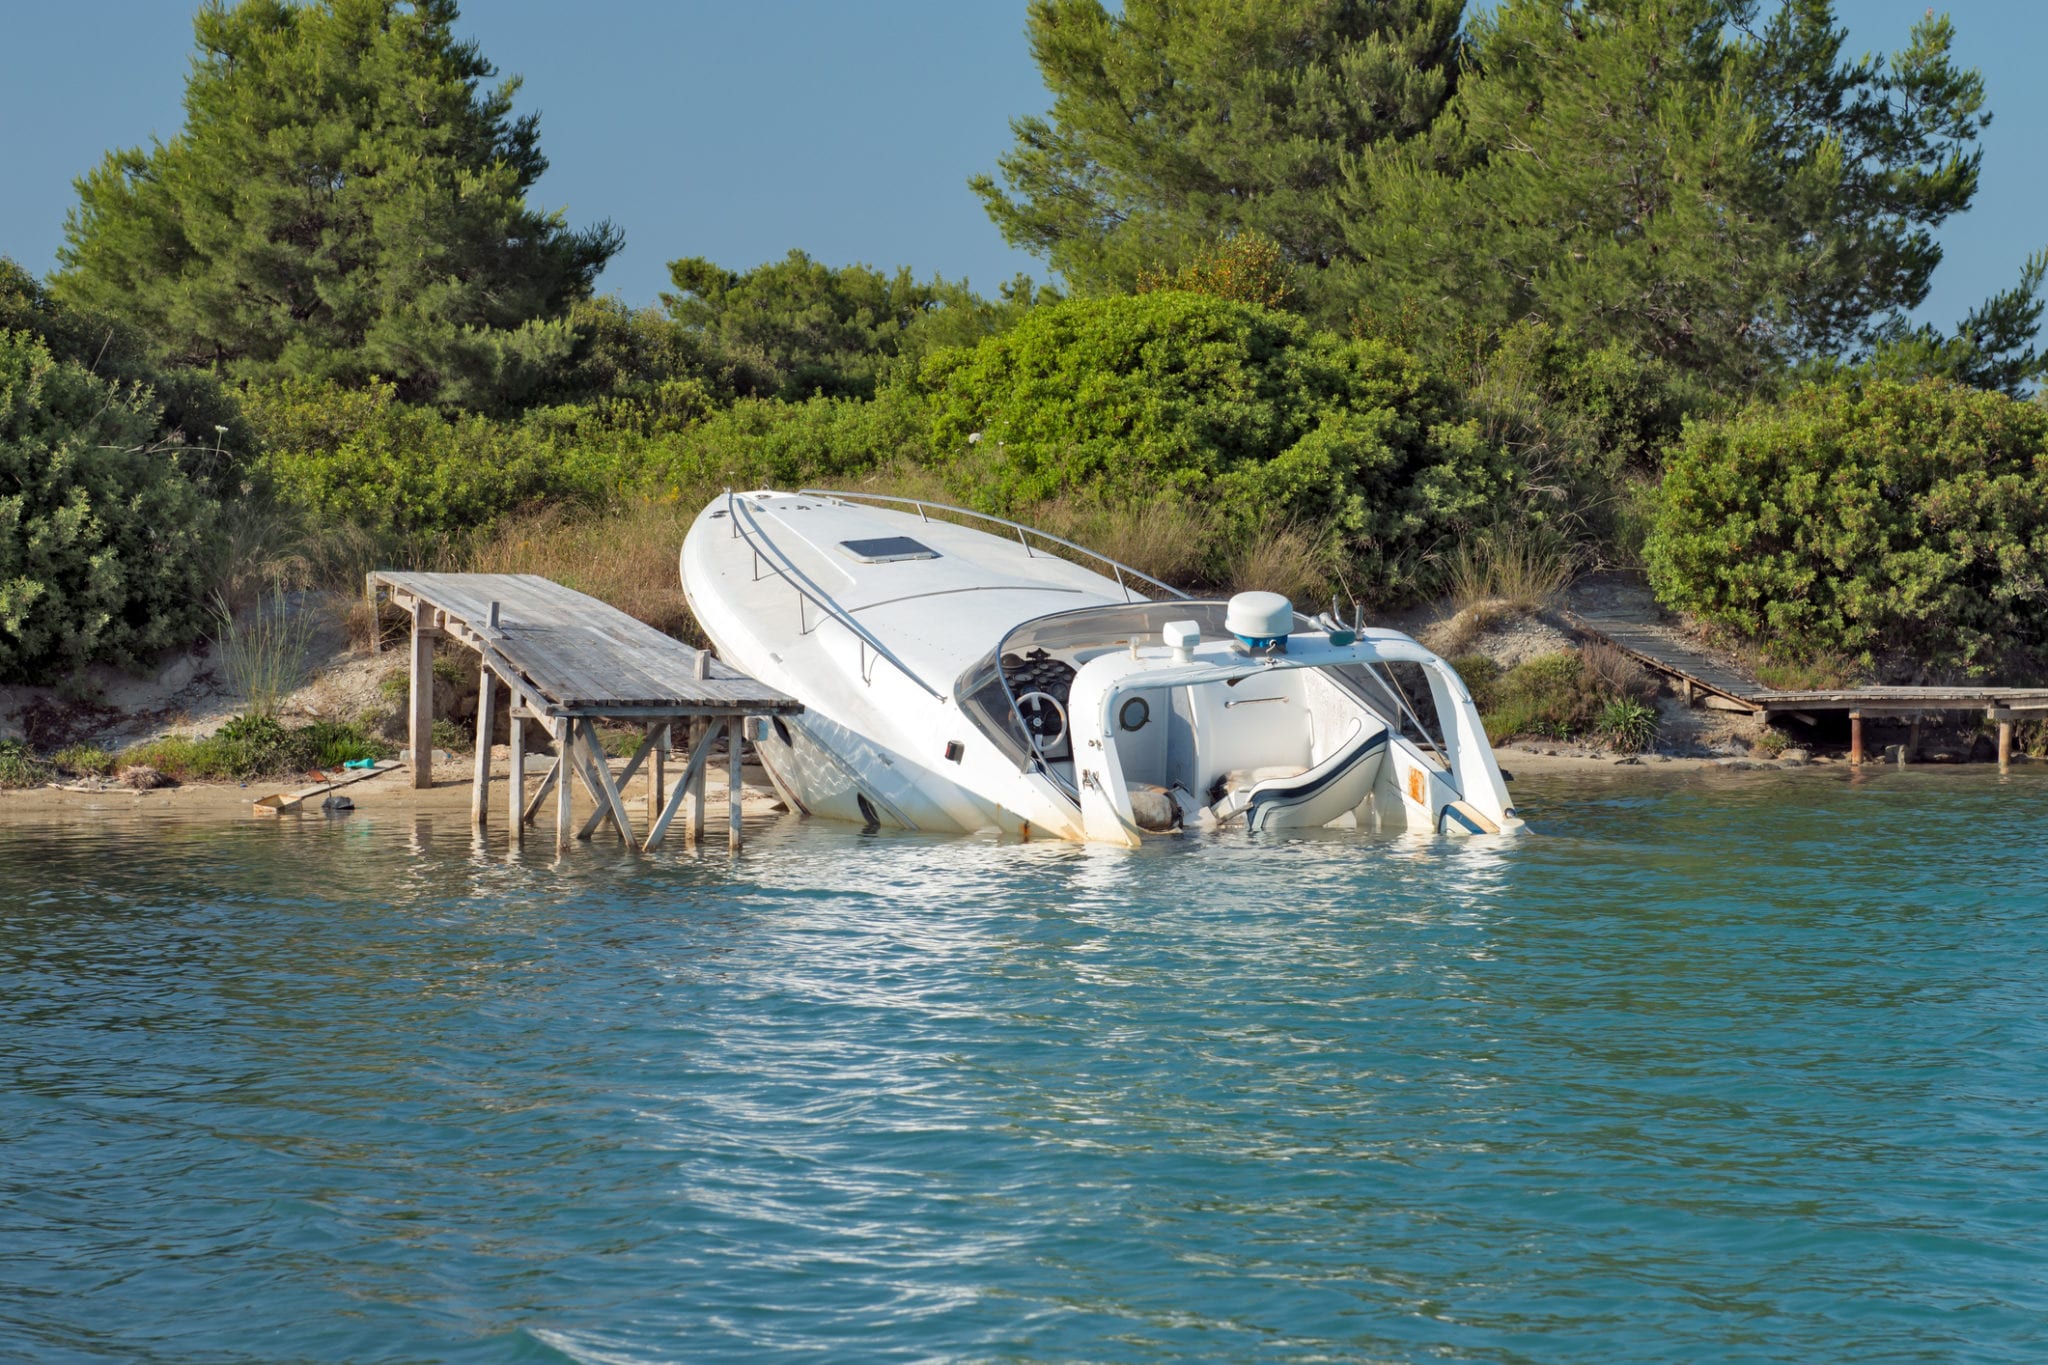 Liability Insurance for Boats